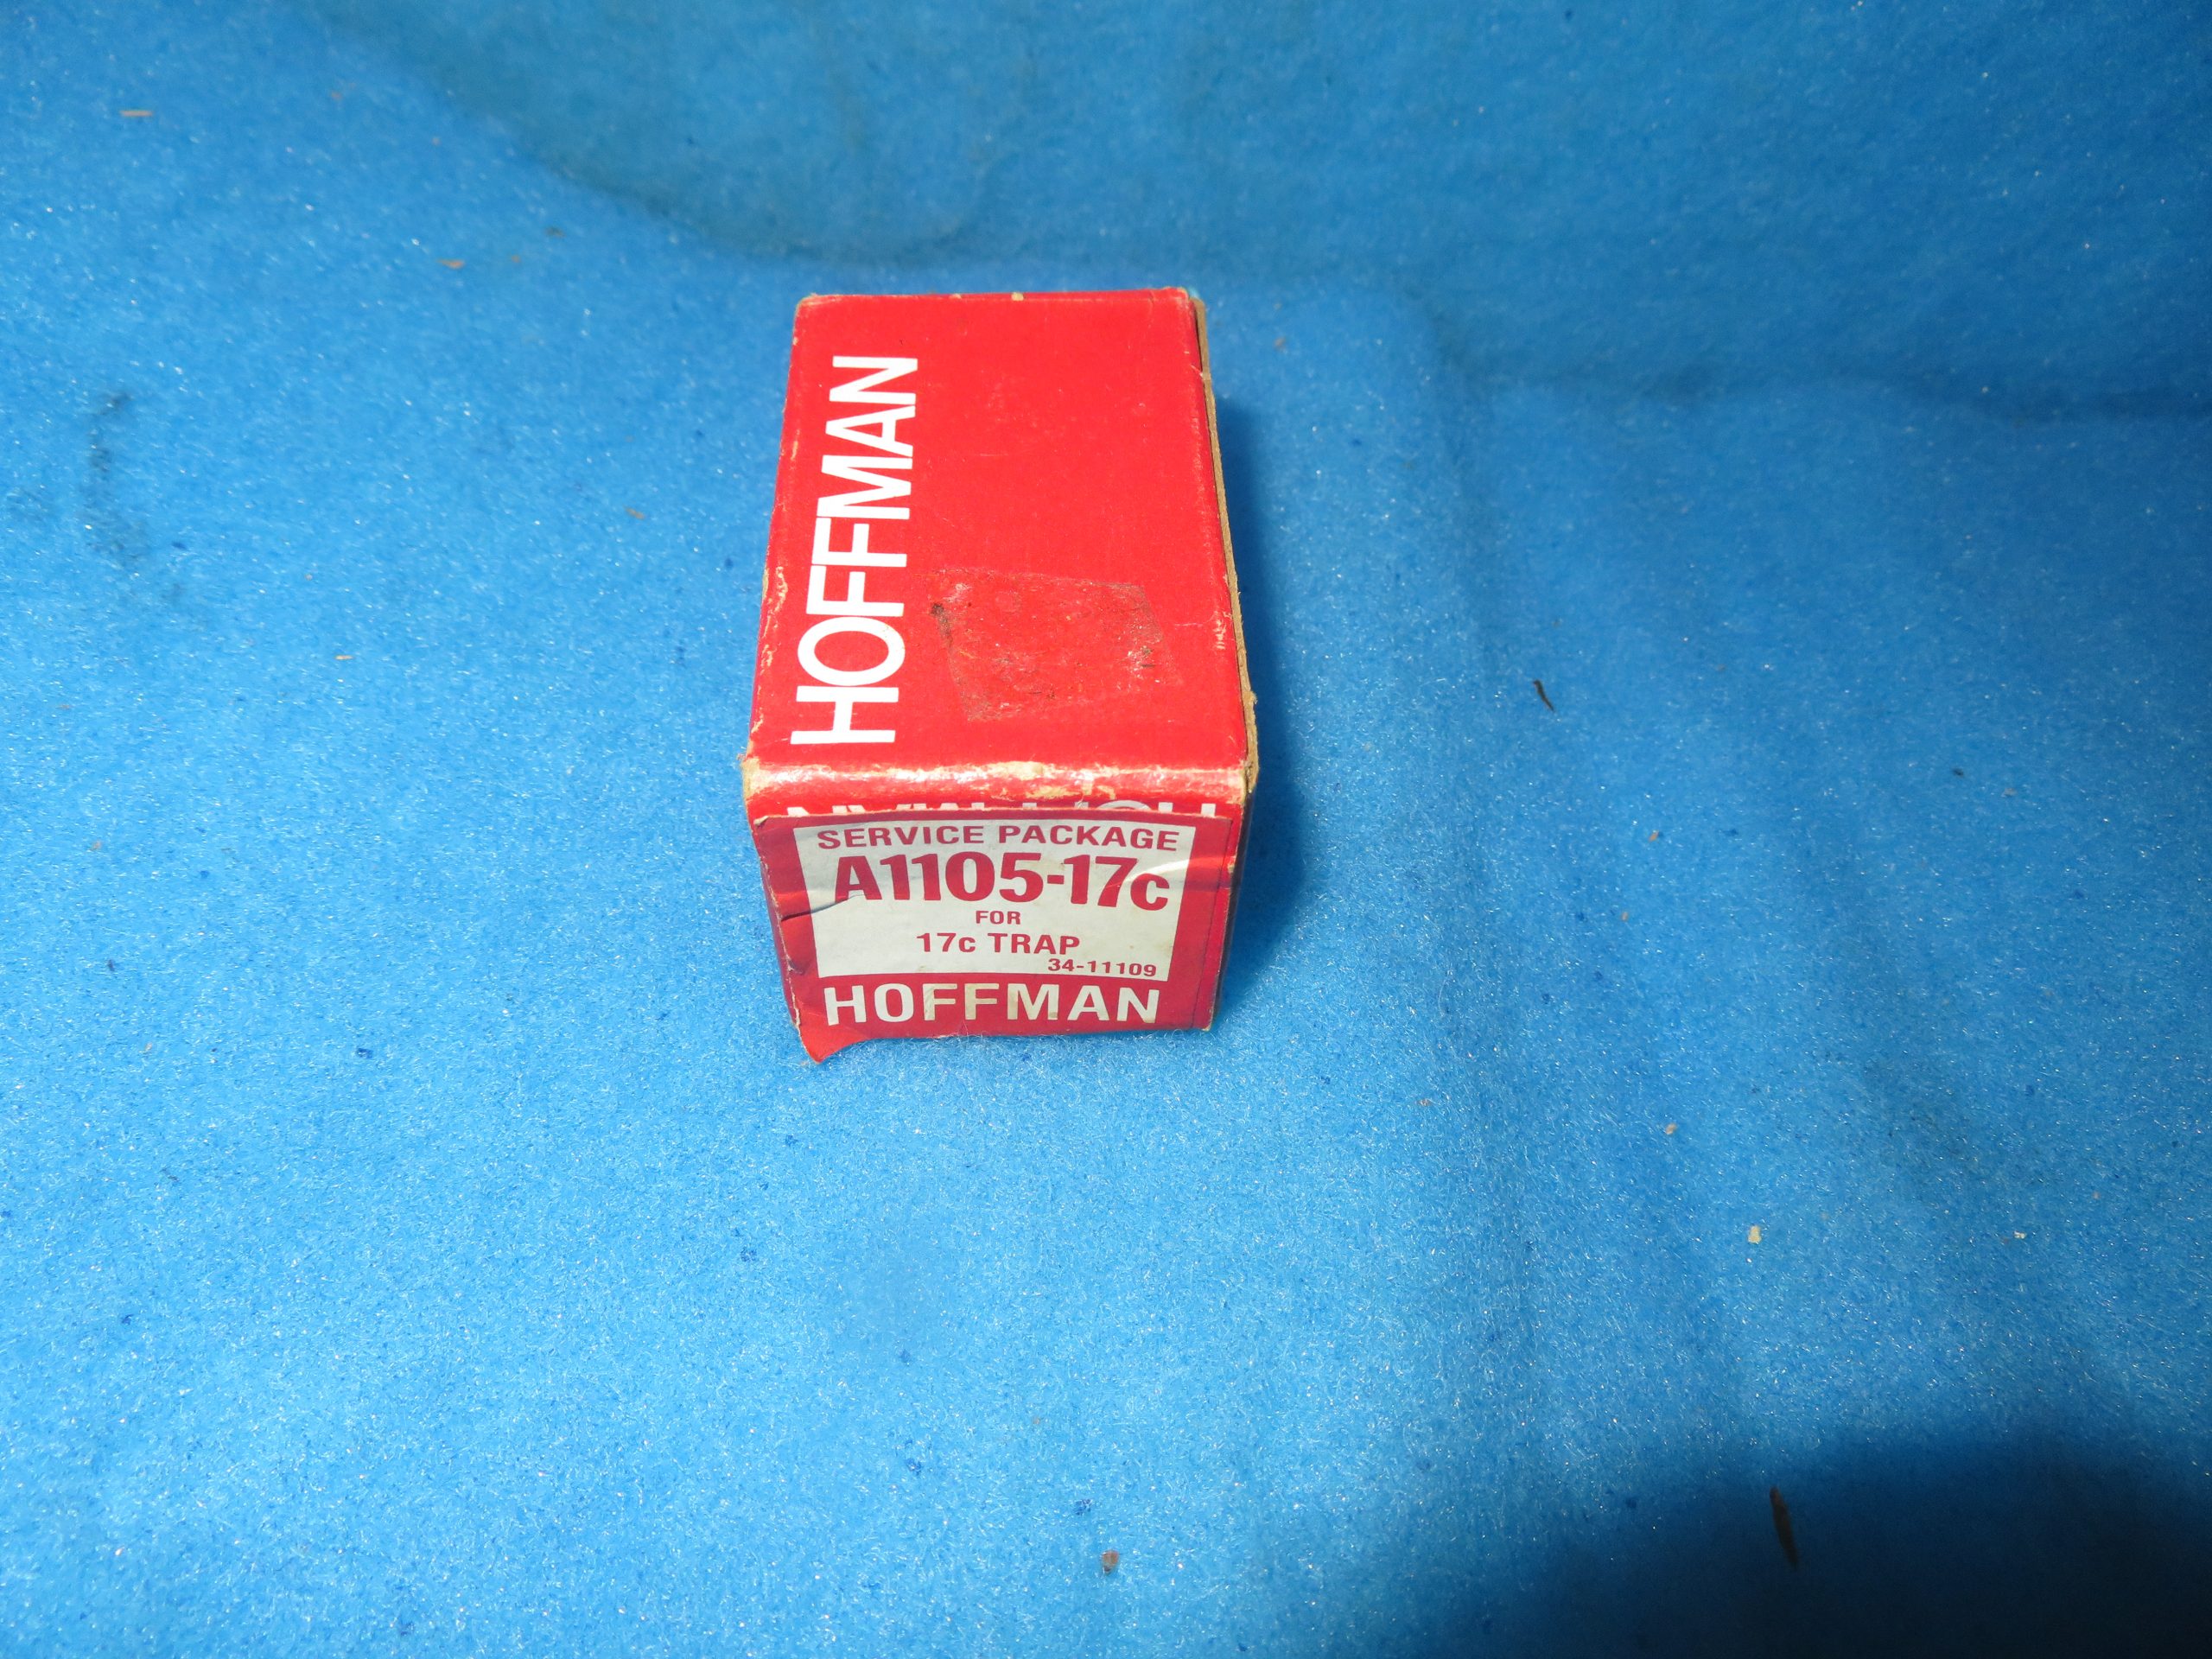 Hoffman A1105-17C  Service Package for 17c Trap 